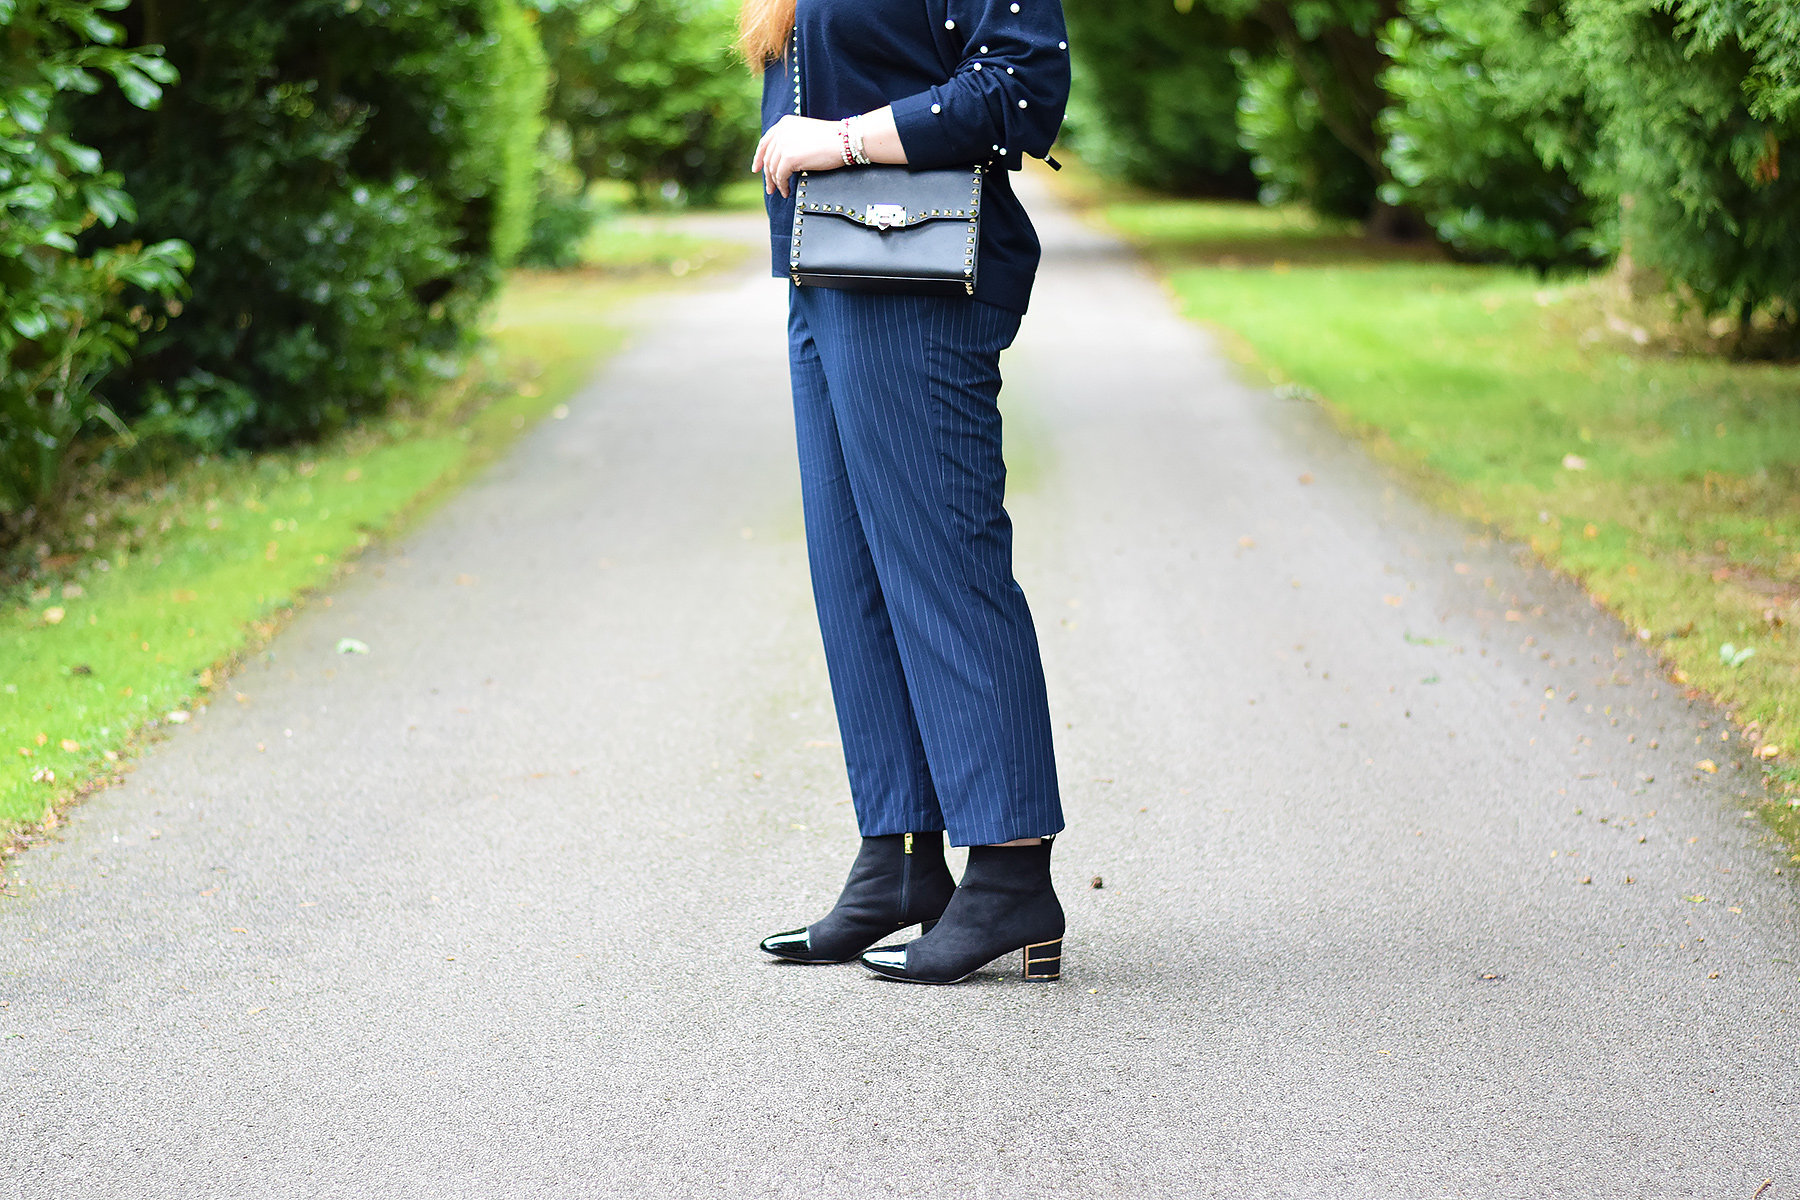 Lotus toe cap ankle boots with zara trousers and Valentino rockstud bag